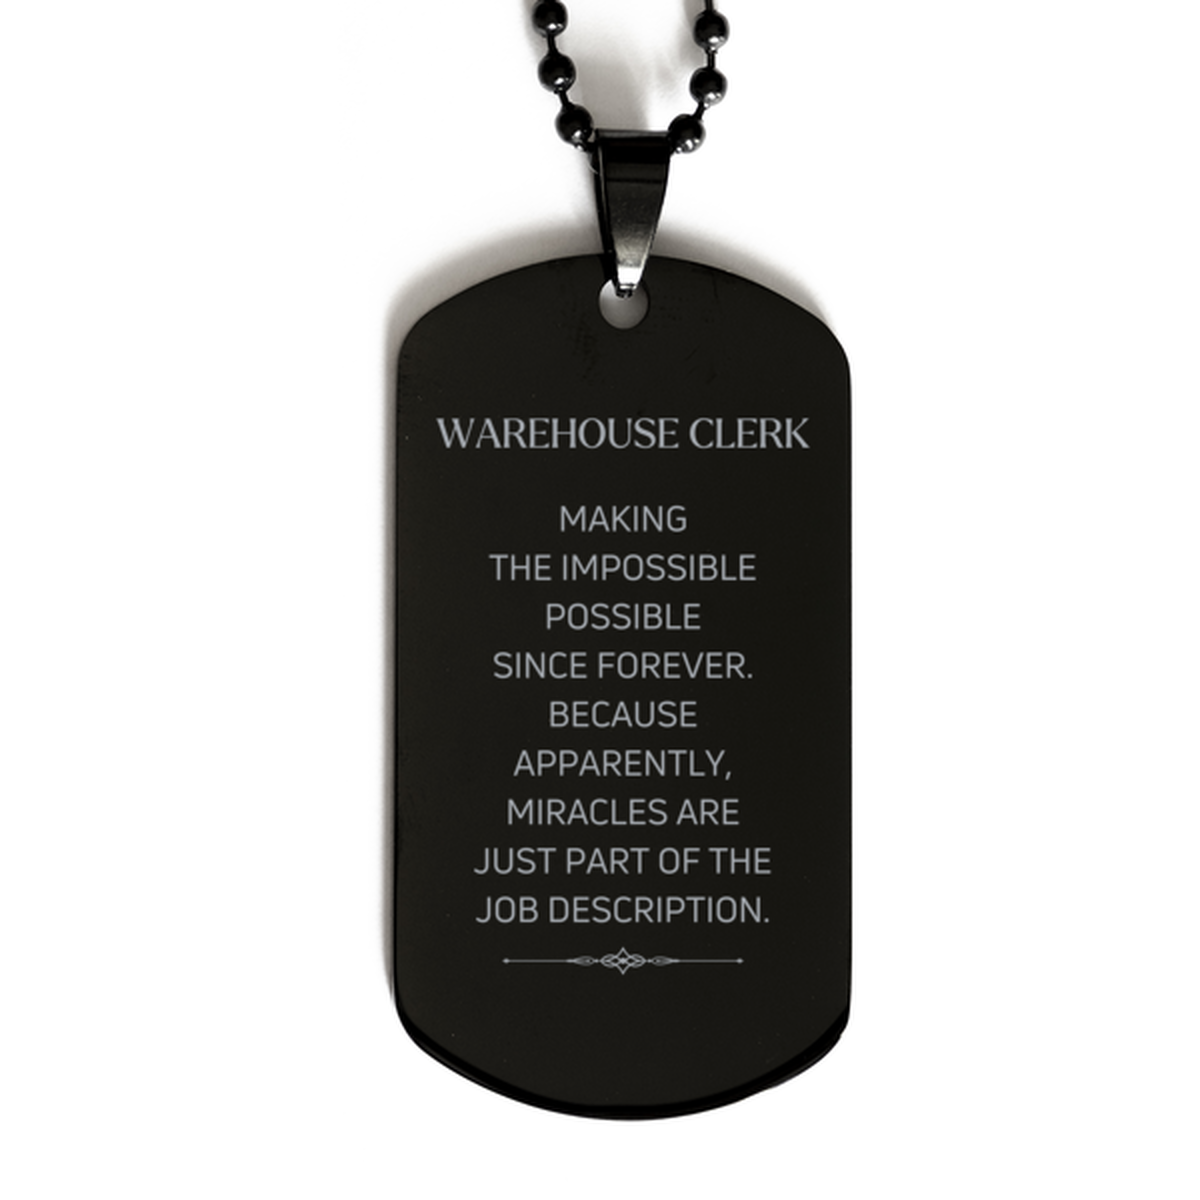 Funny Warehouse Clerk Gifts, Miracles are just part of the job description, Inspirational Birthday Black Dog Tag For Warehouse Clerk, Men, Women, Coworkers, Friends, Boss